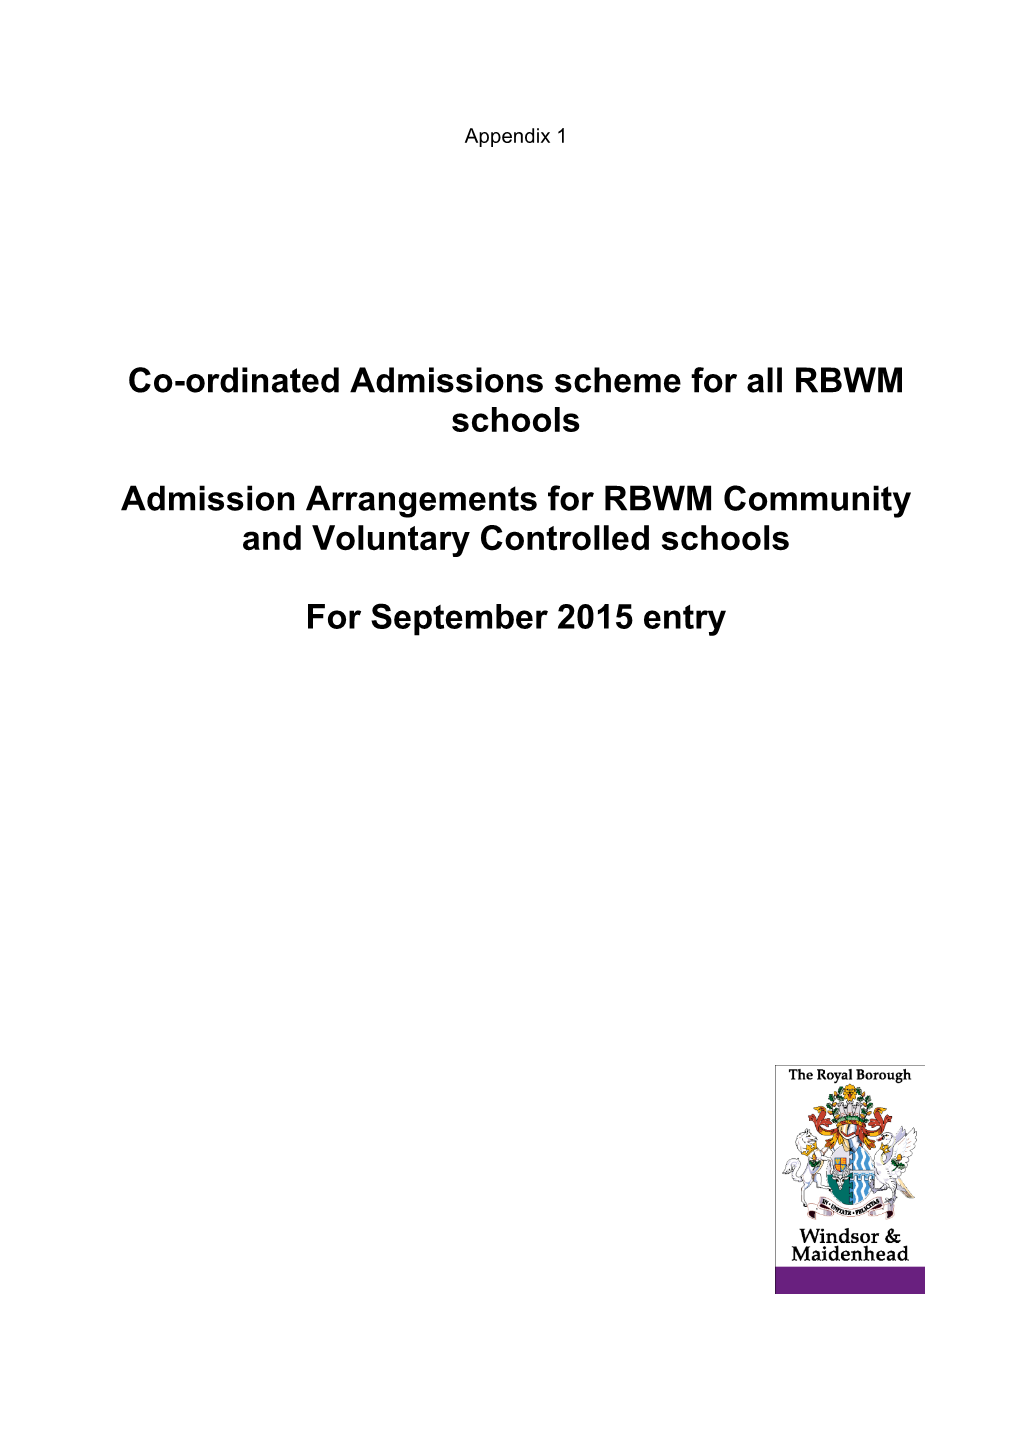 Co-Ordinated Admissions Scheme for All RBWM Schools Admission Arrangements for RBWM Community and Voluntary Controlled Schools